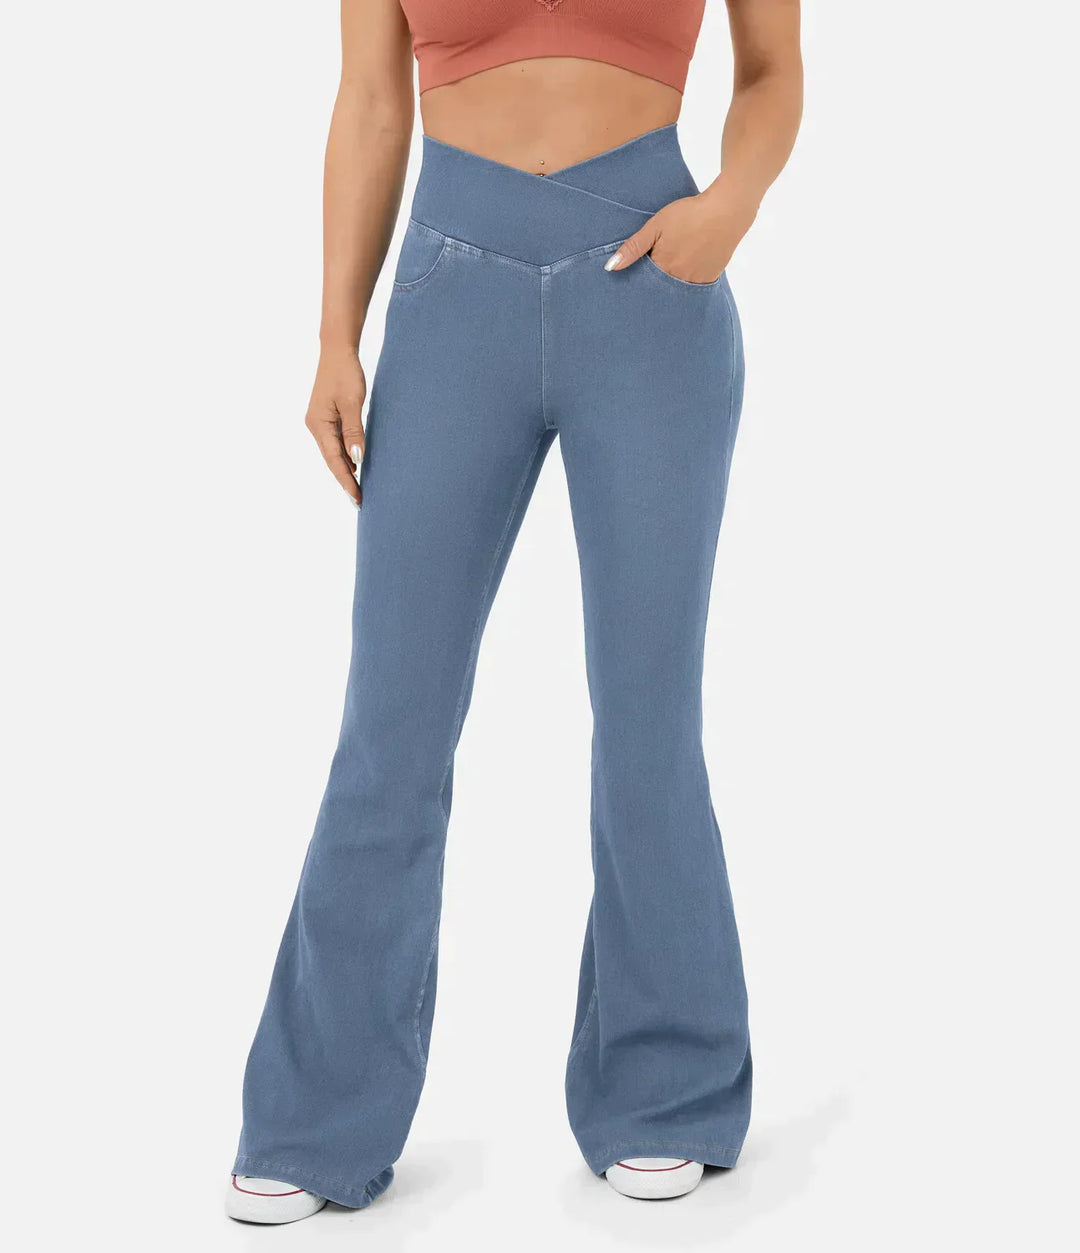 Cassia™ stretch flare jeans met hoge taille